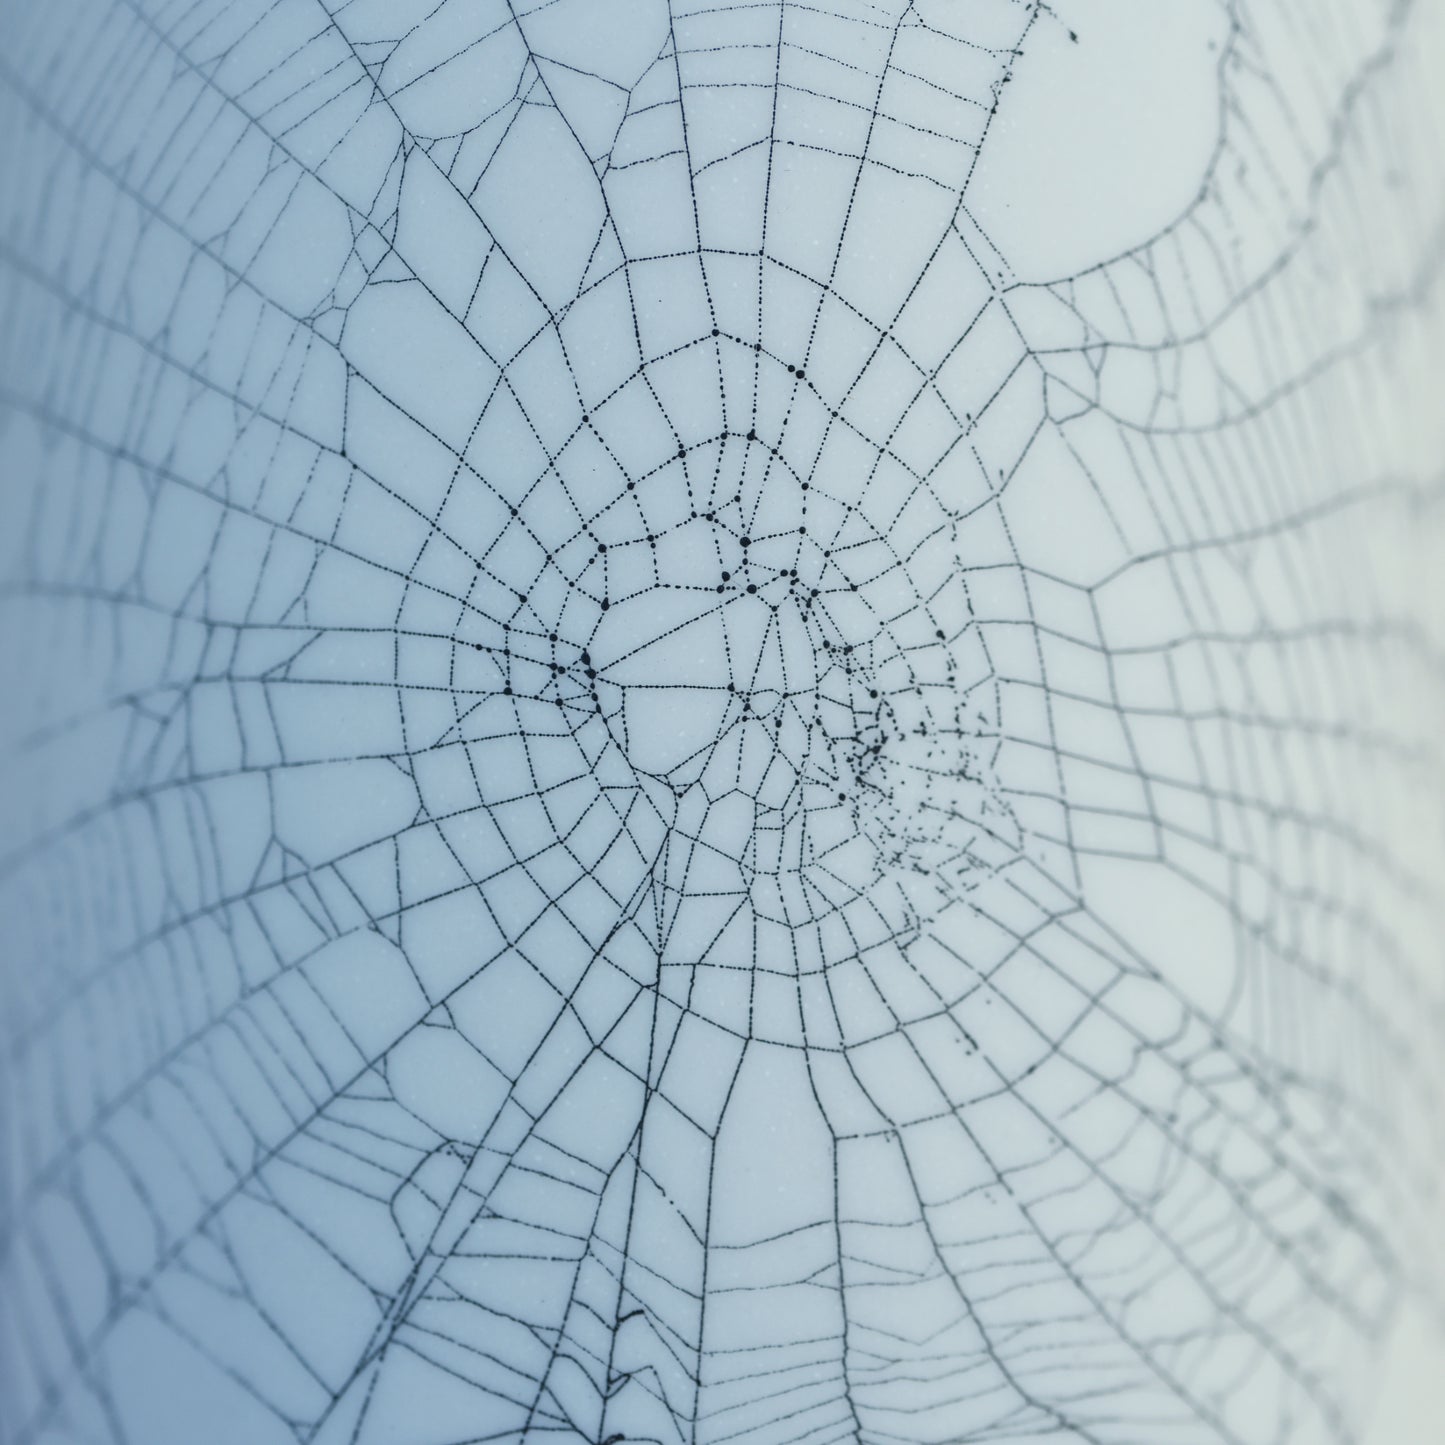 Web on Clay (118), Collected September 09, 2022